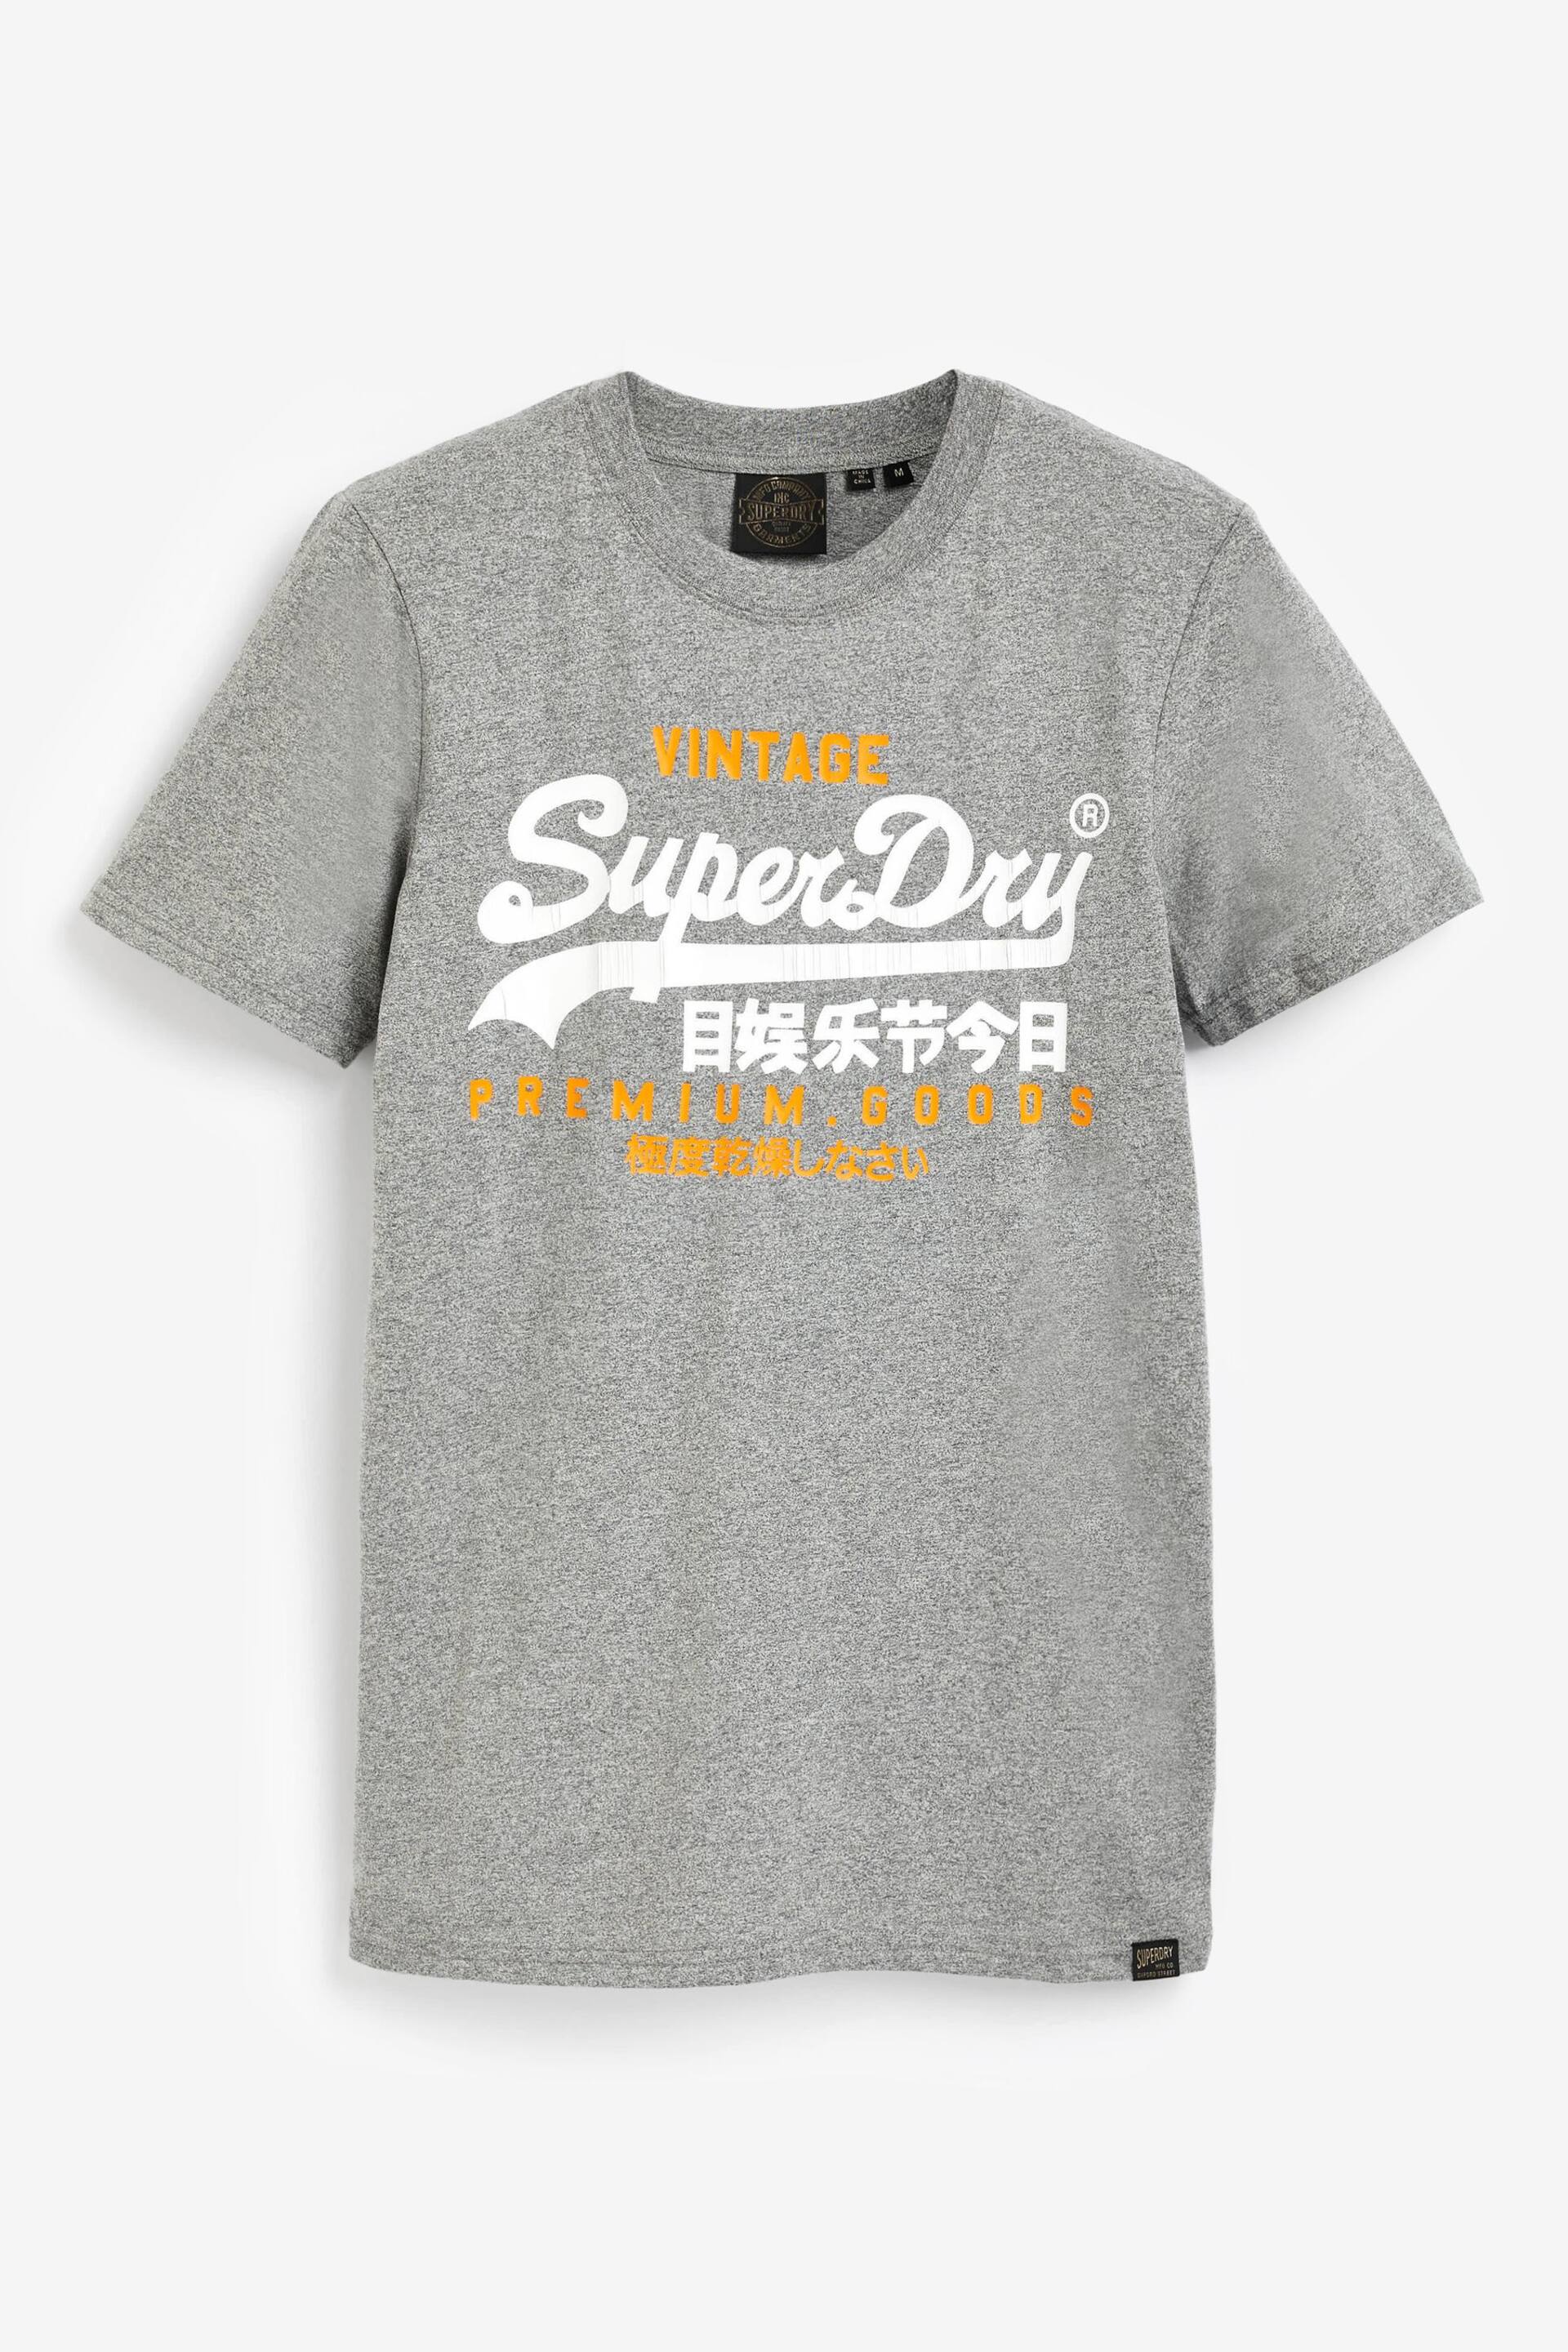 Superdry Grey Vl Duo T-Shirt - Image 5 of 7